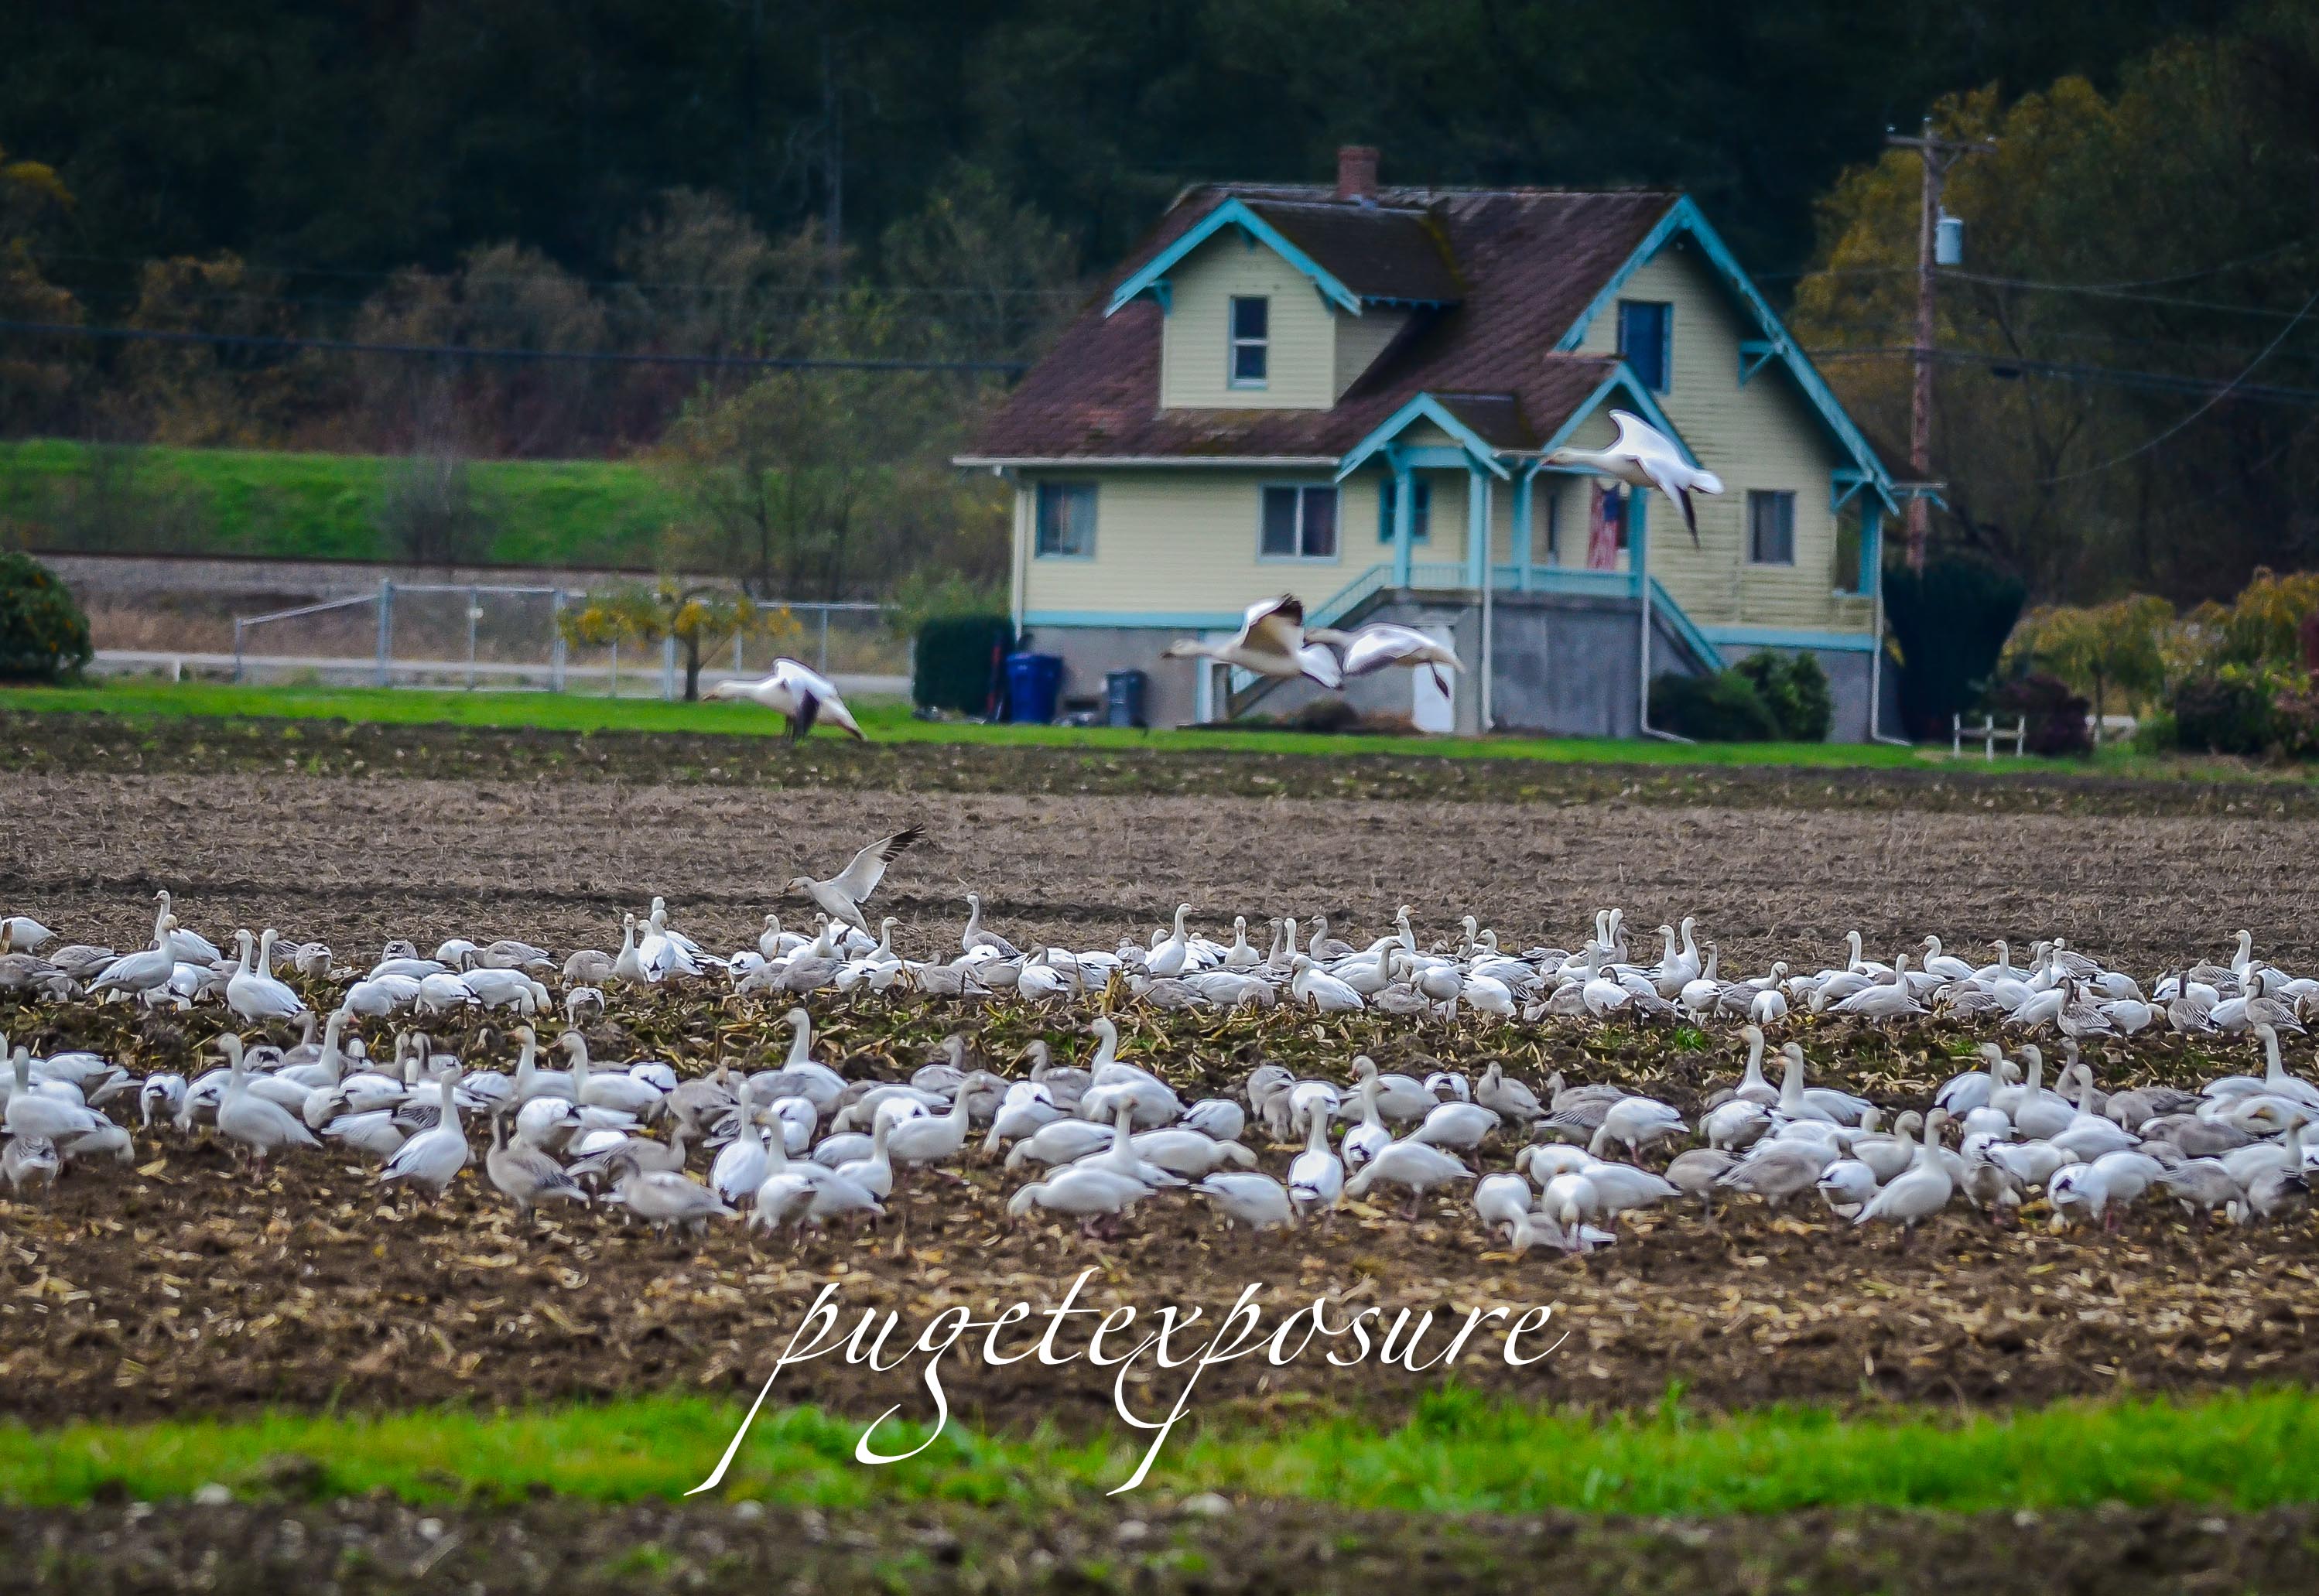 Pioneer Highway Farm house and a large flock of Snow Geese